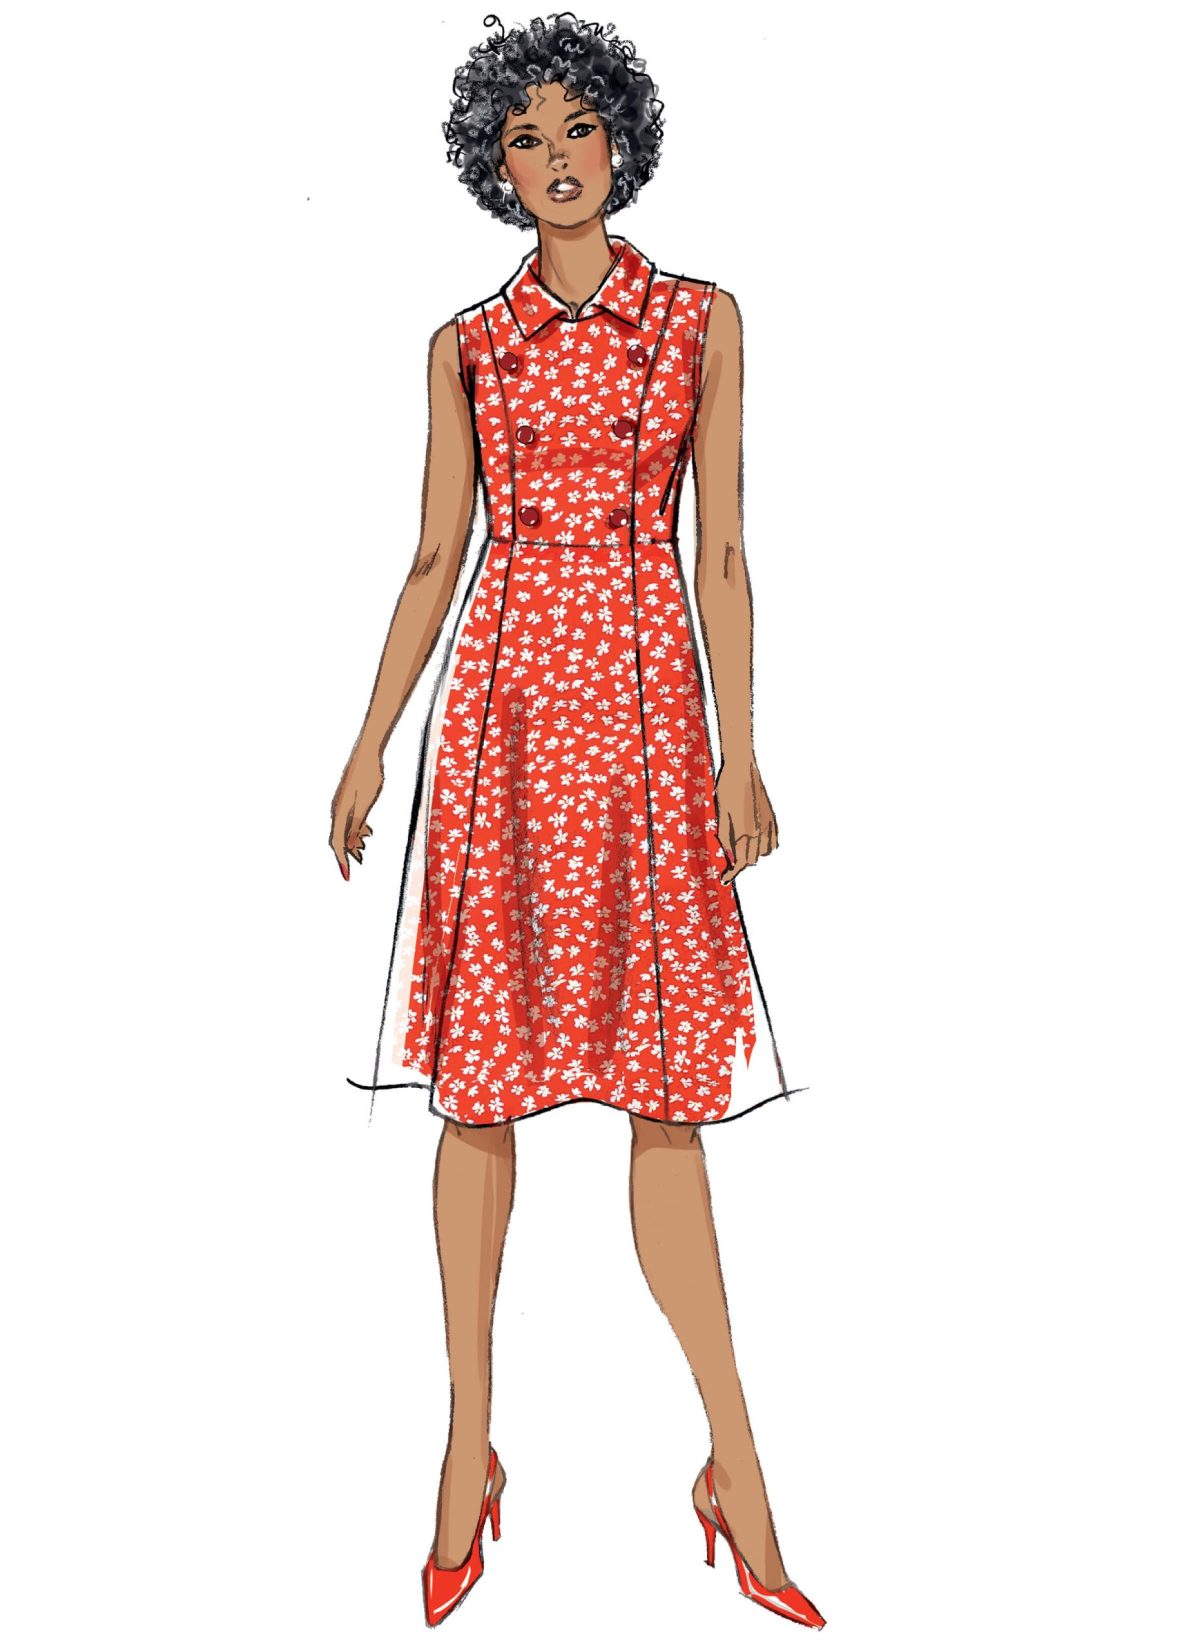 Butterick Sewing Pattern B6871 Misses' A-line Dress